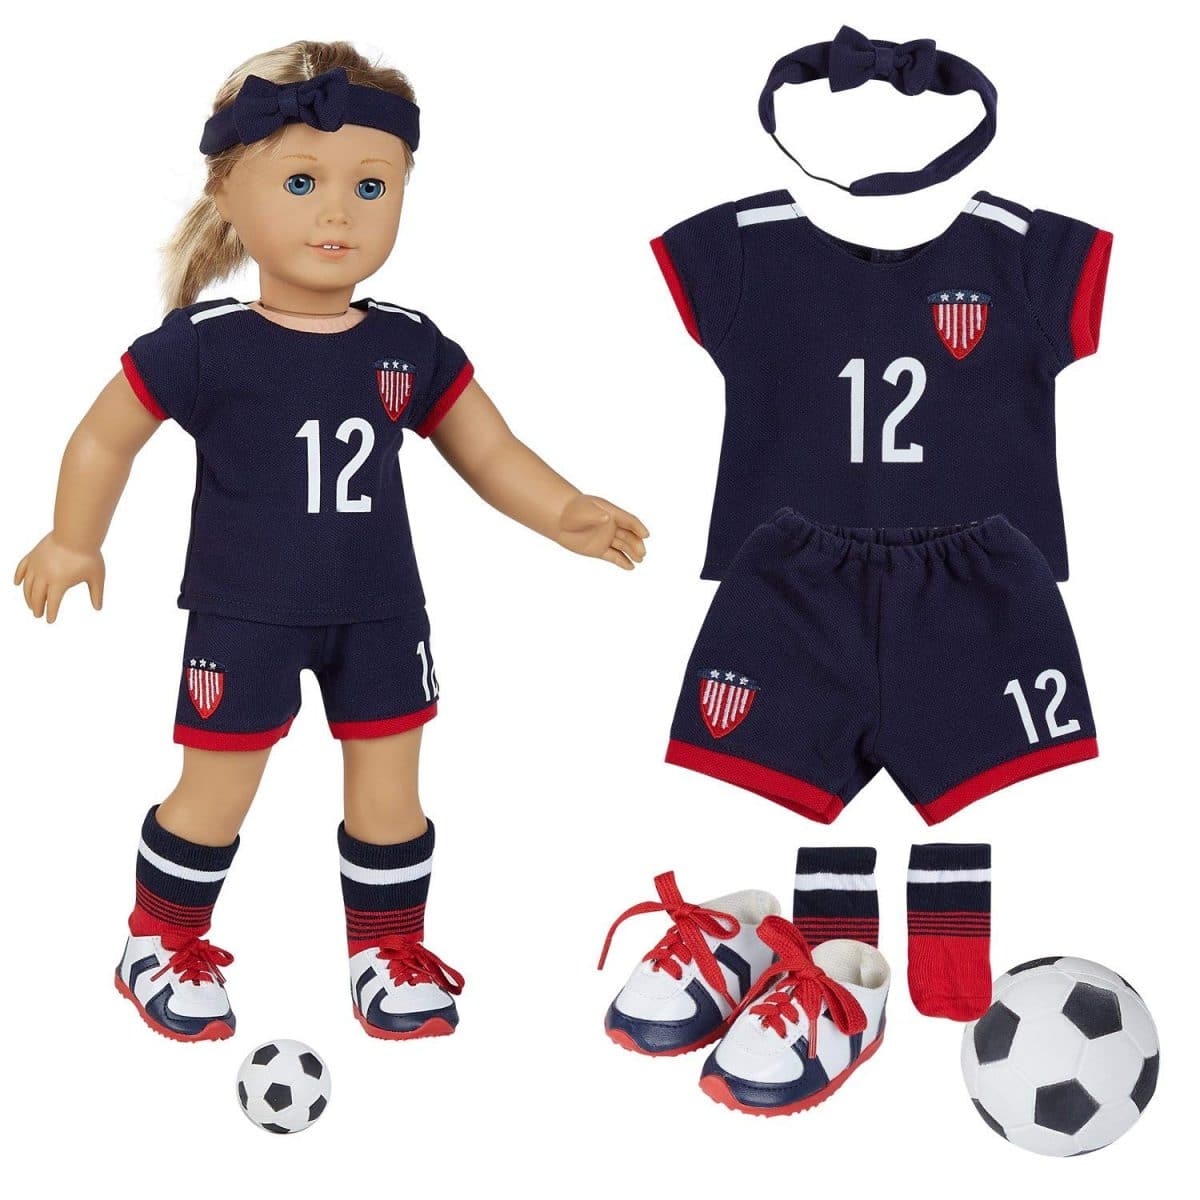 Handmade Sportswear Clothes Outfit Accessories For 18 inch American Doll Girls